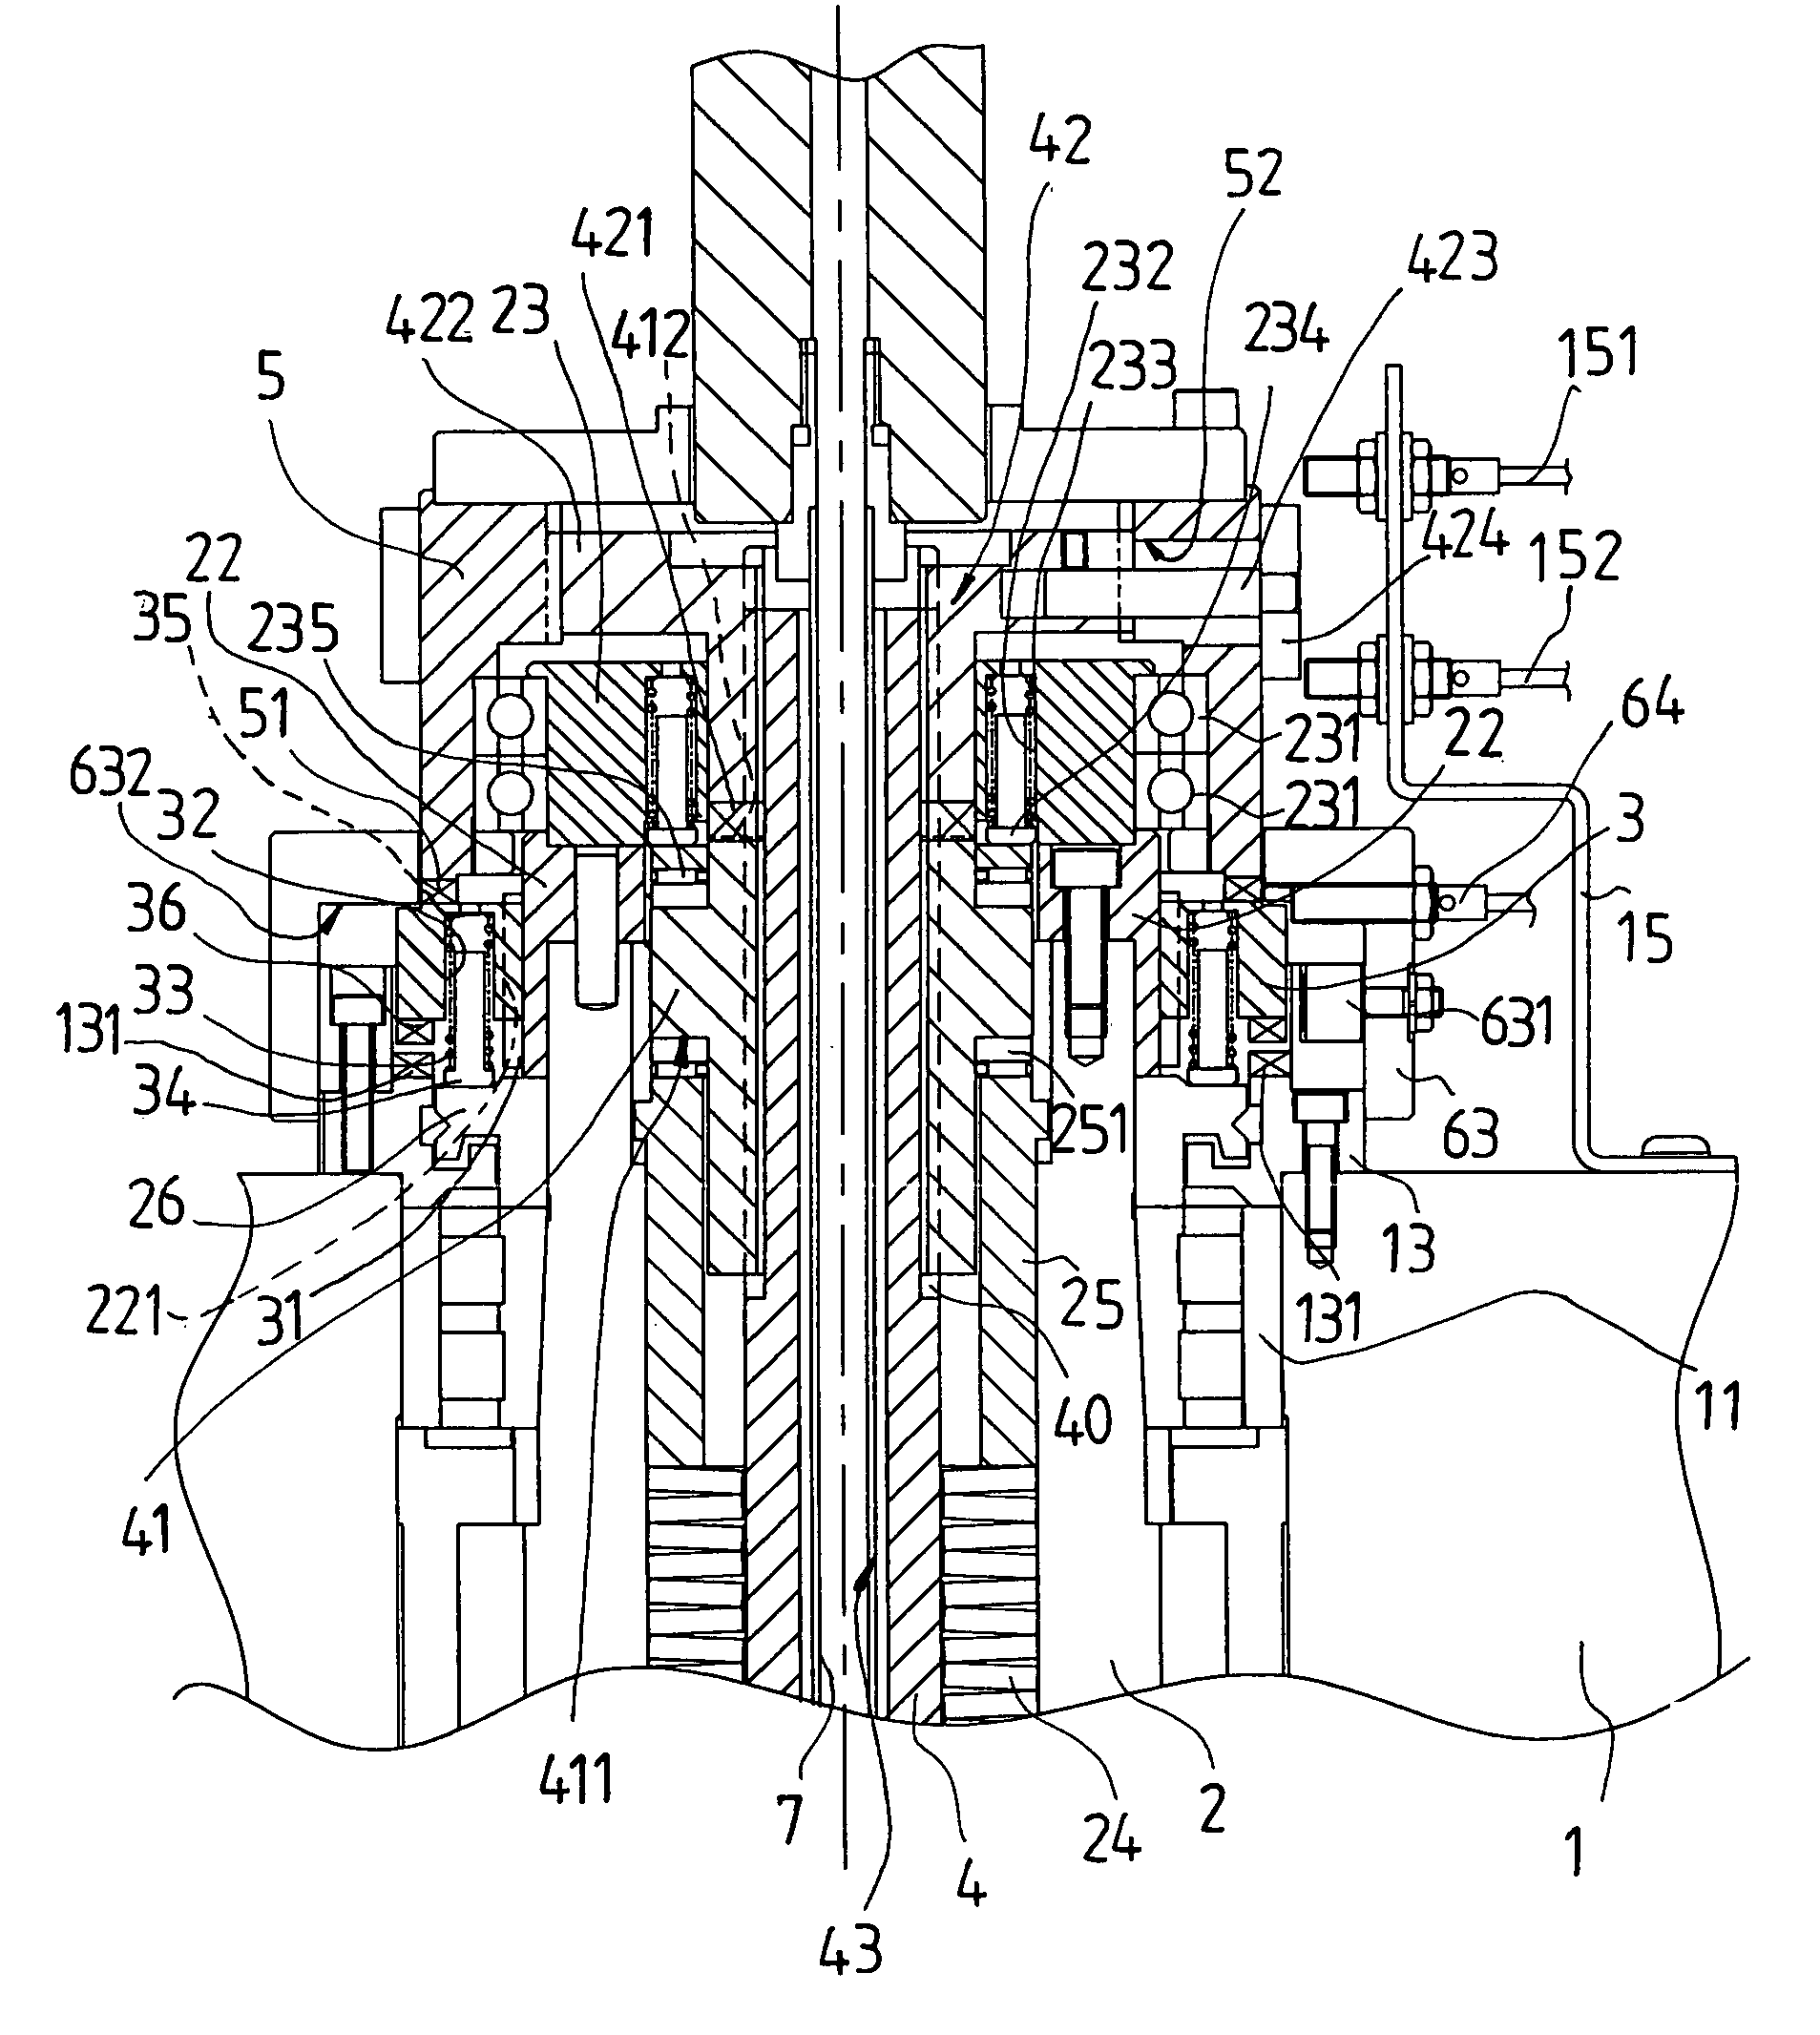 Structure of a spindle of a machining center